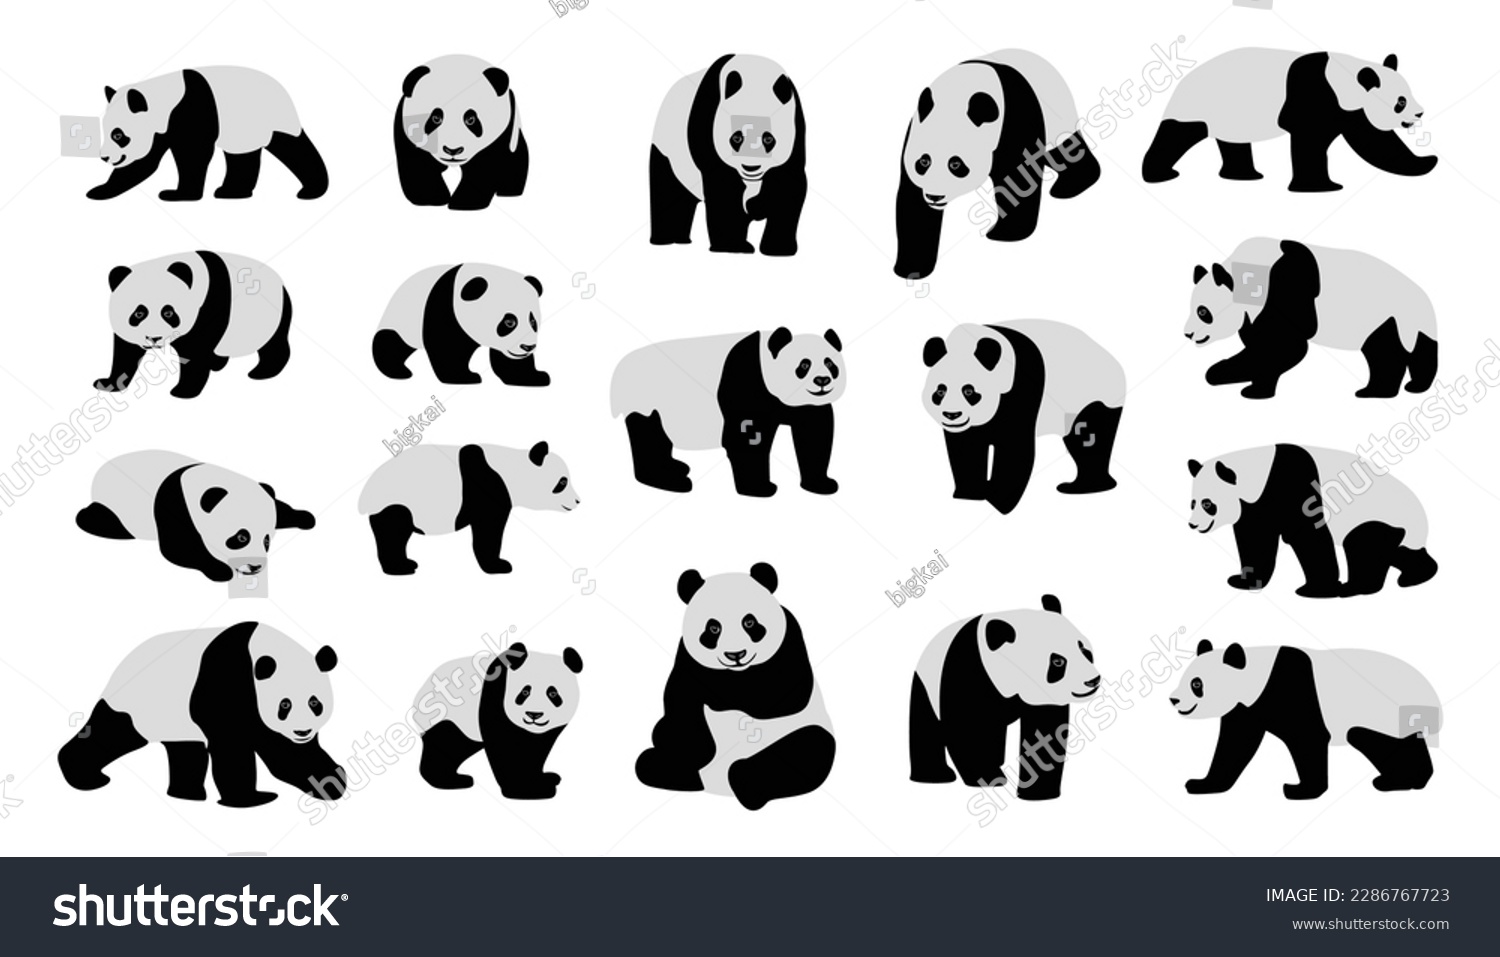 SVG of cute panda Vector illustration isolated on colorful Set of cute big pandas in different poses. flat vector illustration design svg